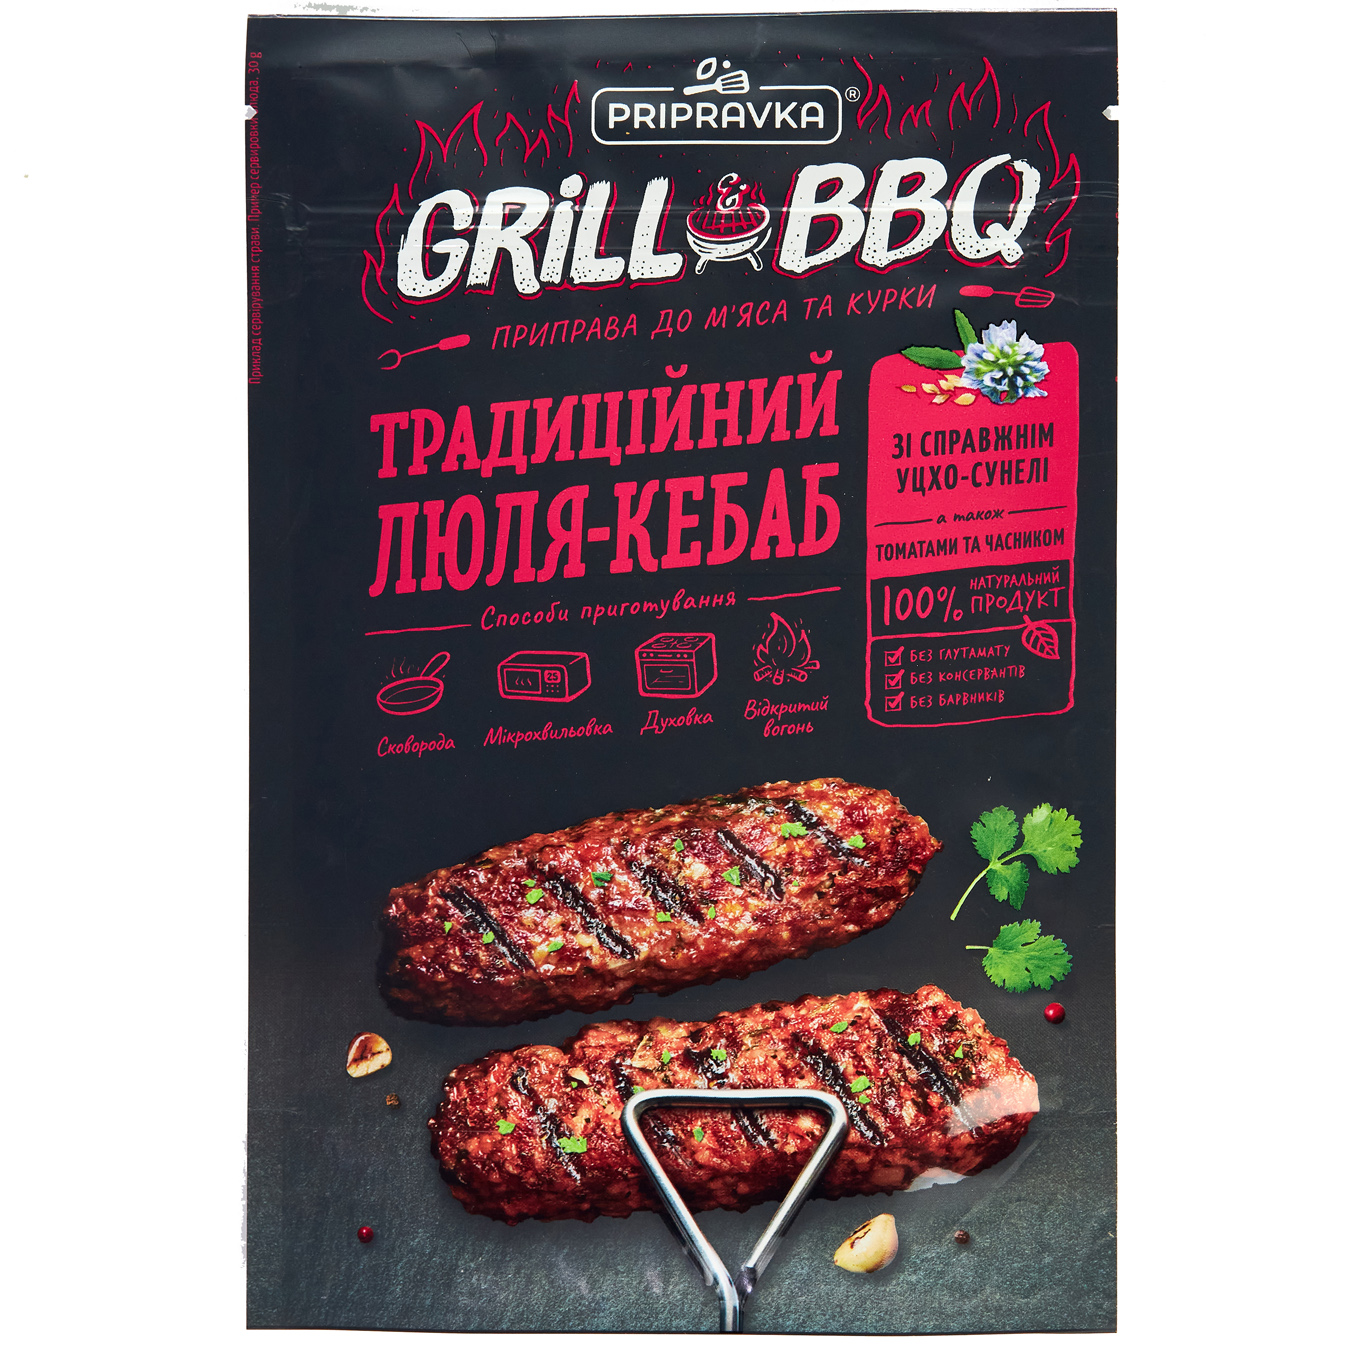 Pripravka Grill & BBQ seasoning for meat and chicken Traditional lula kebab with real utskho suneli, tomatoes and garlic 30g